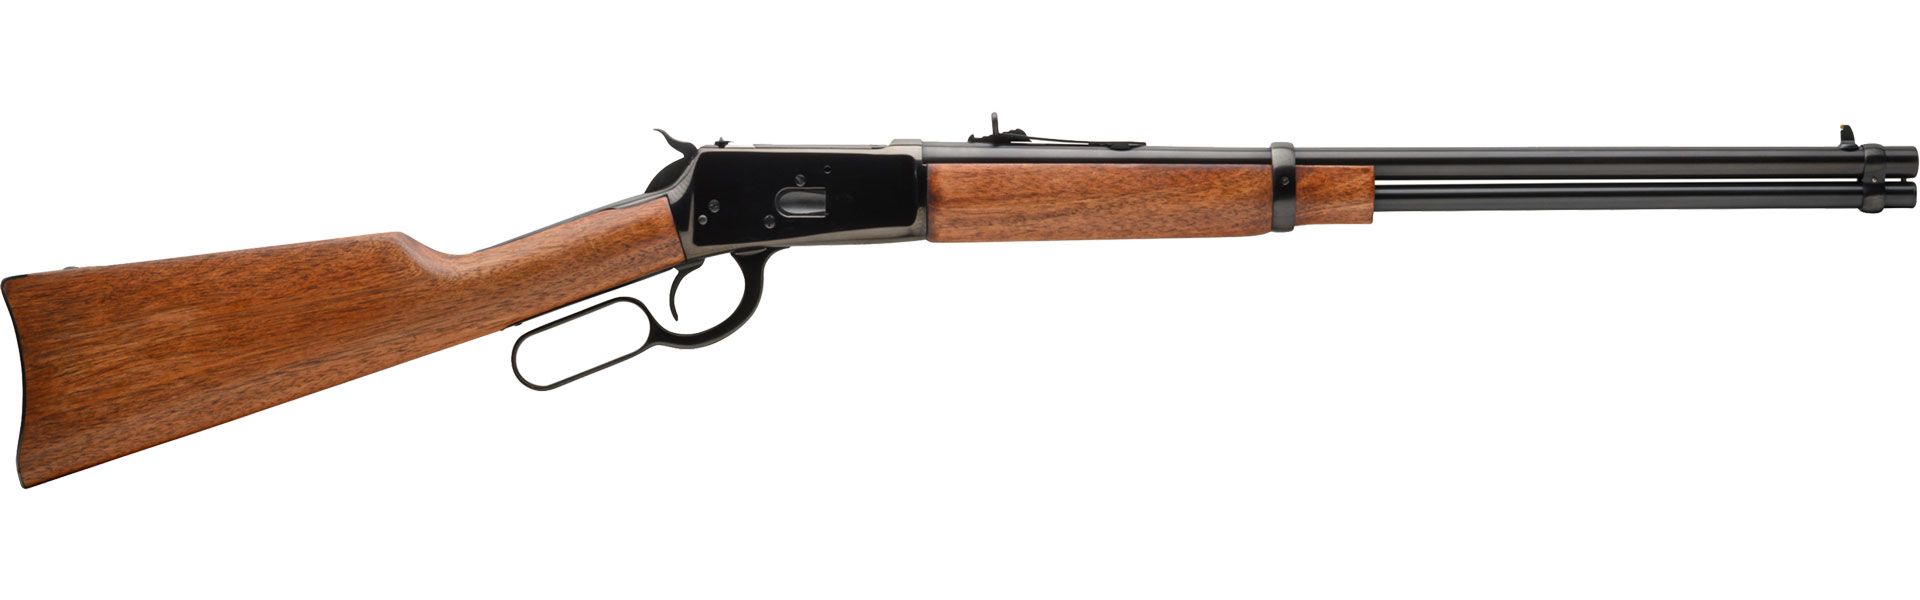 R92 Traditional hardwood stock, Black, 357 MAG / 38 SPECIAL +P, 20 In.